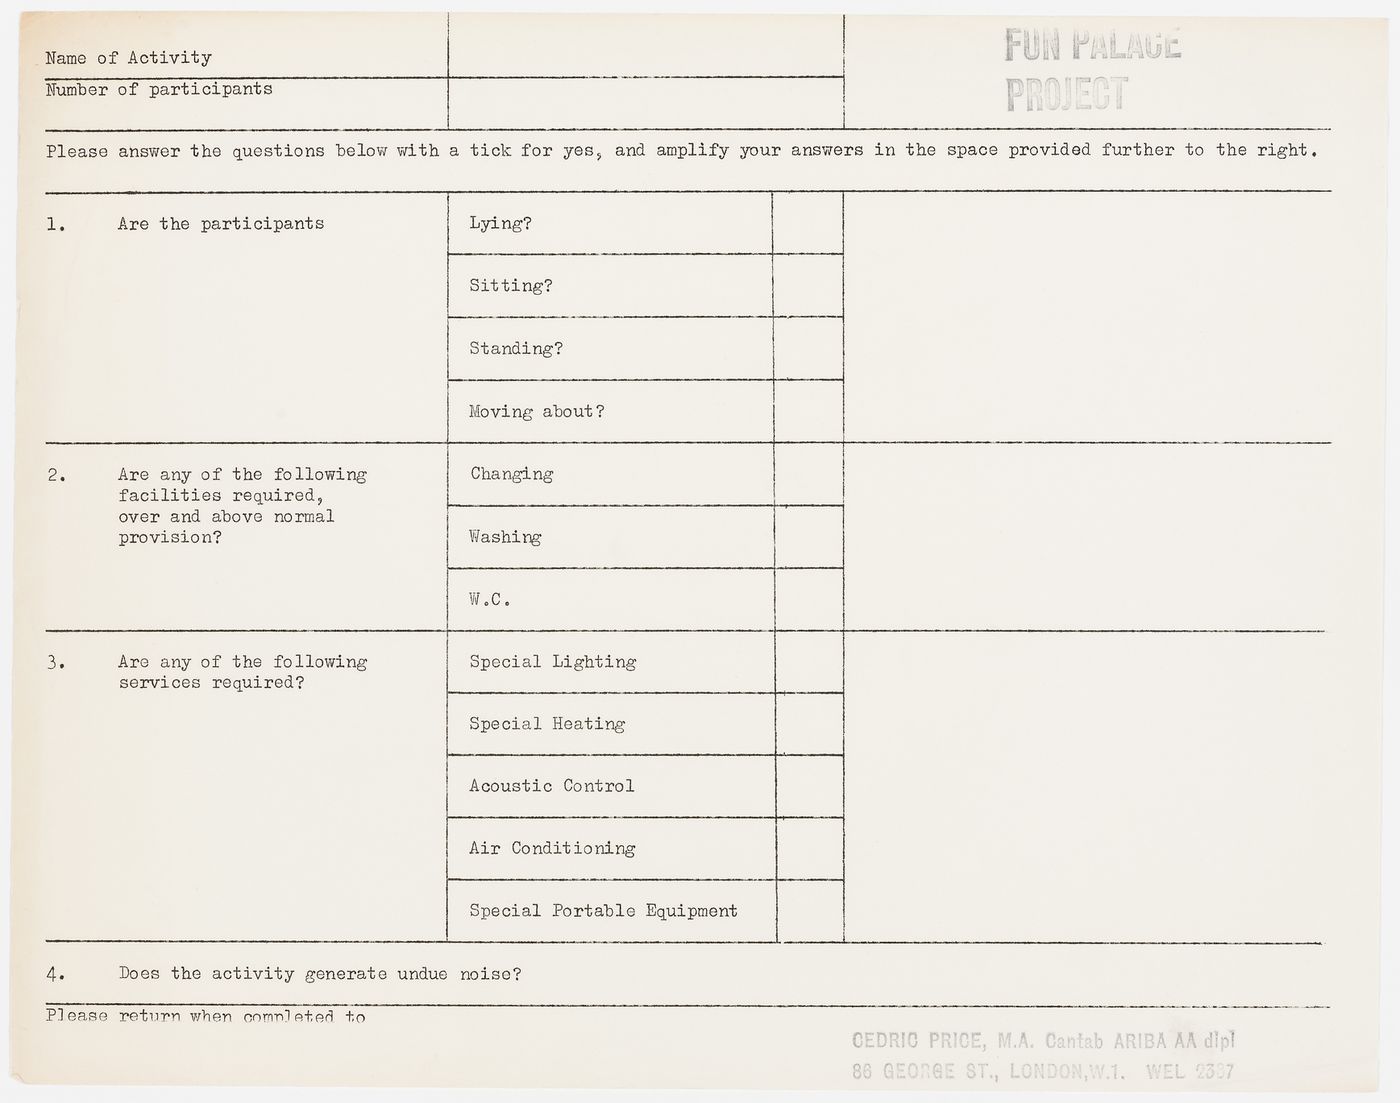 Form for acquiring information regarding an activity to be held at the Fun Palace